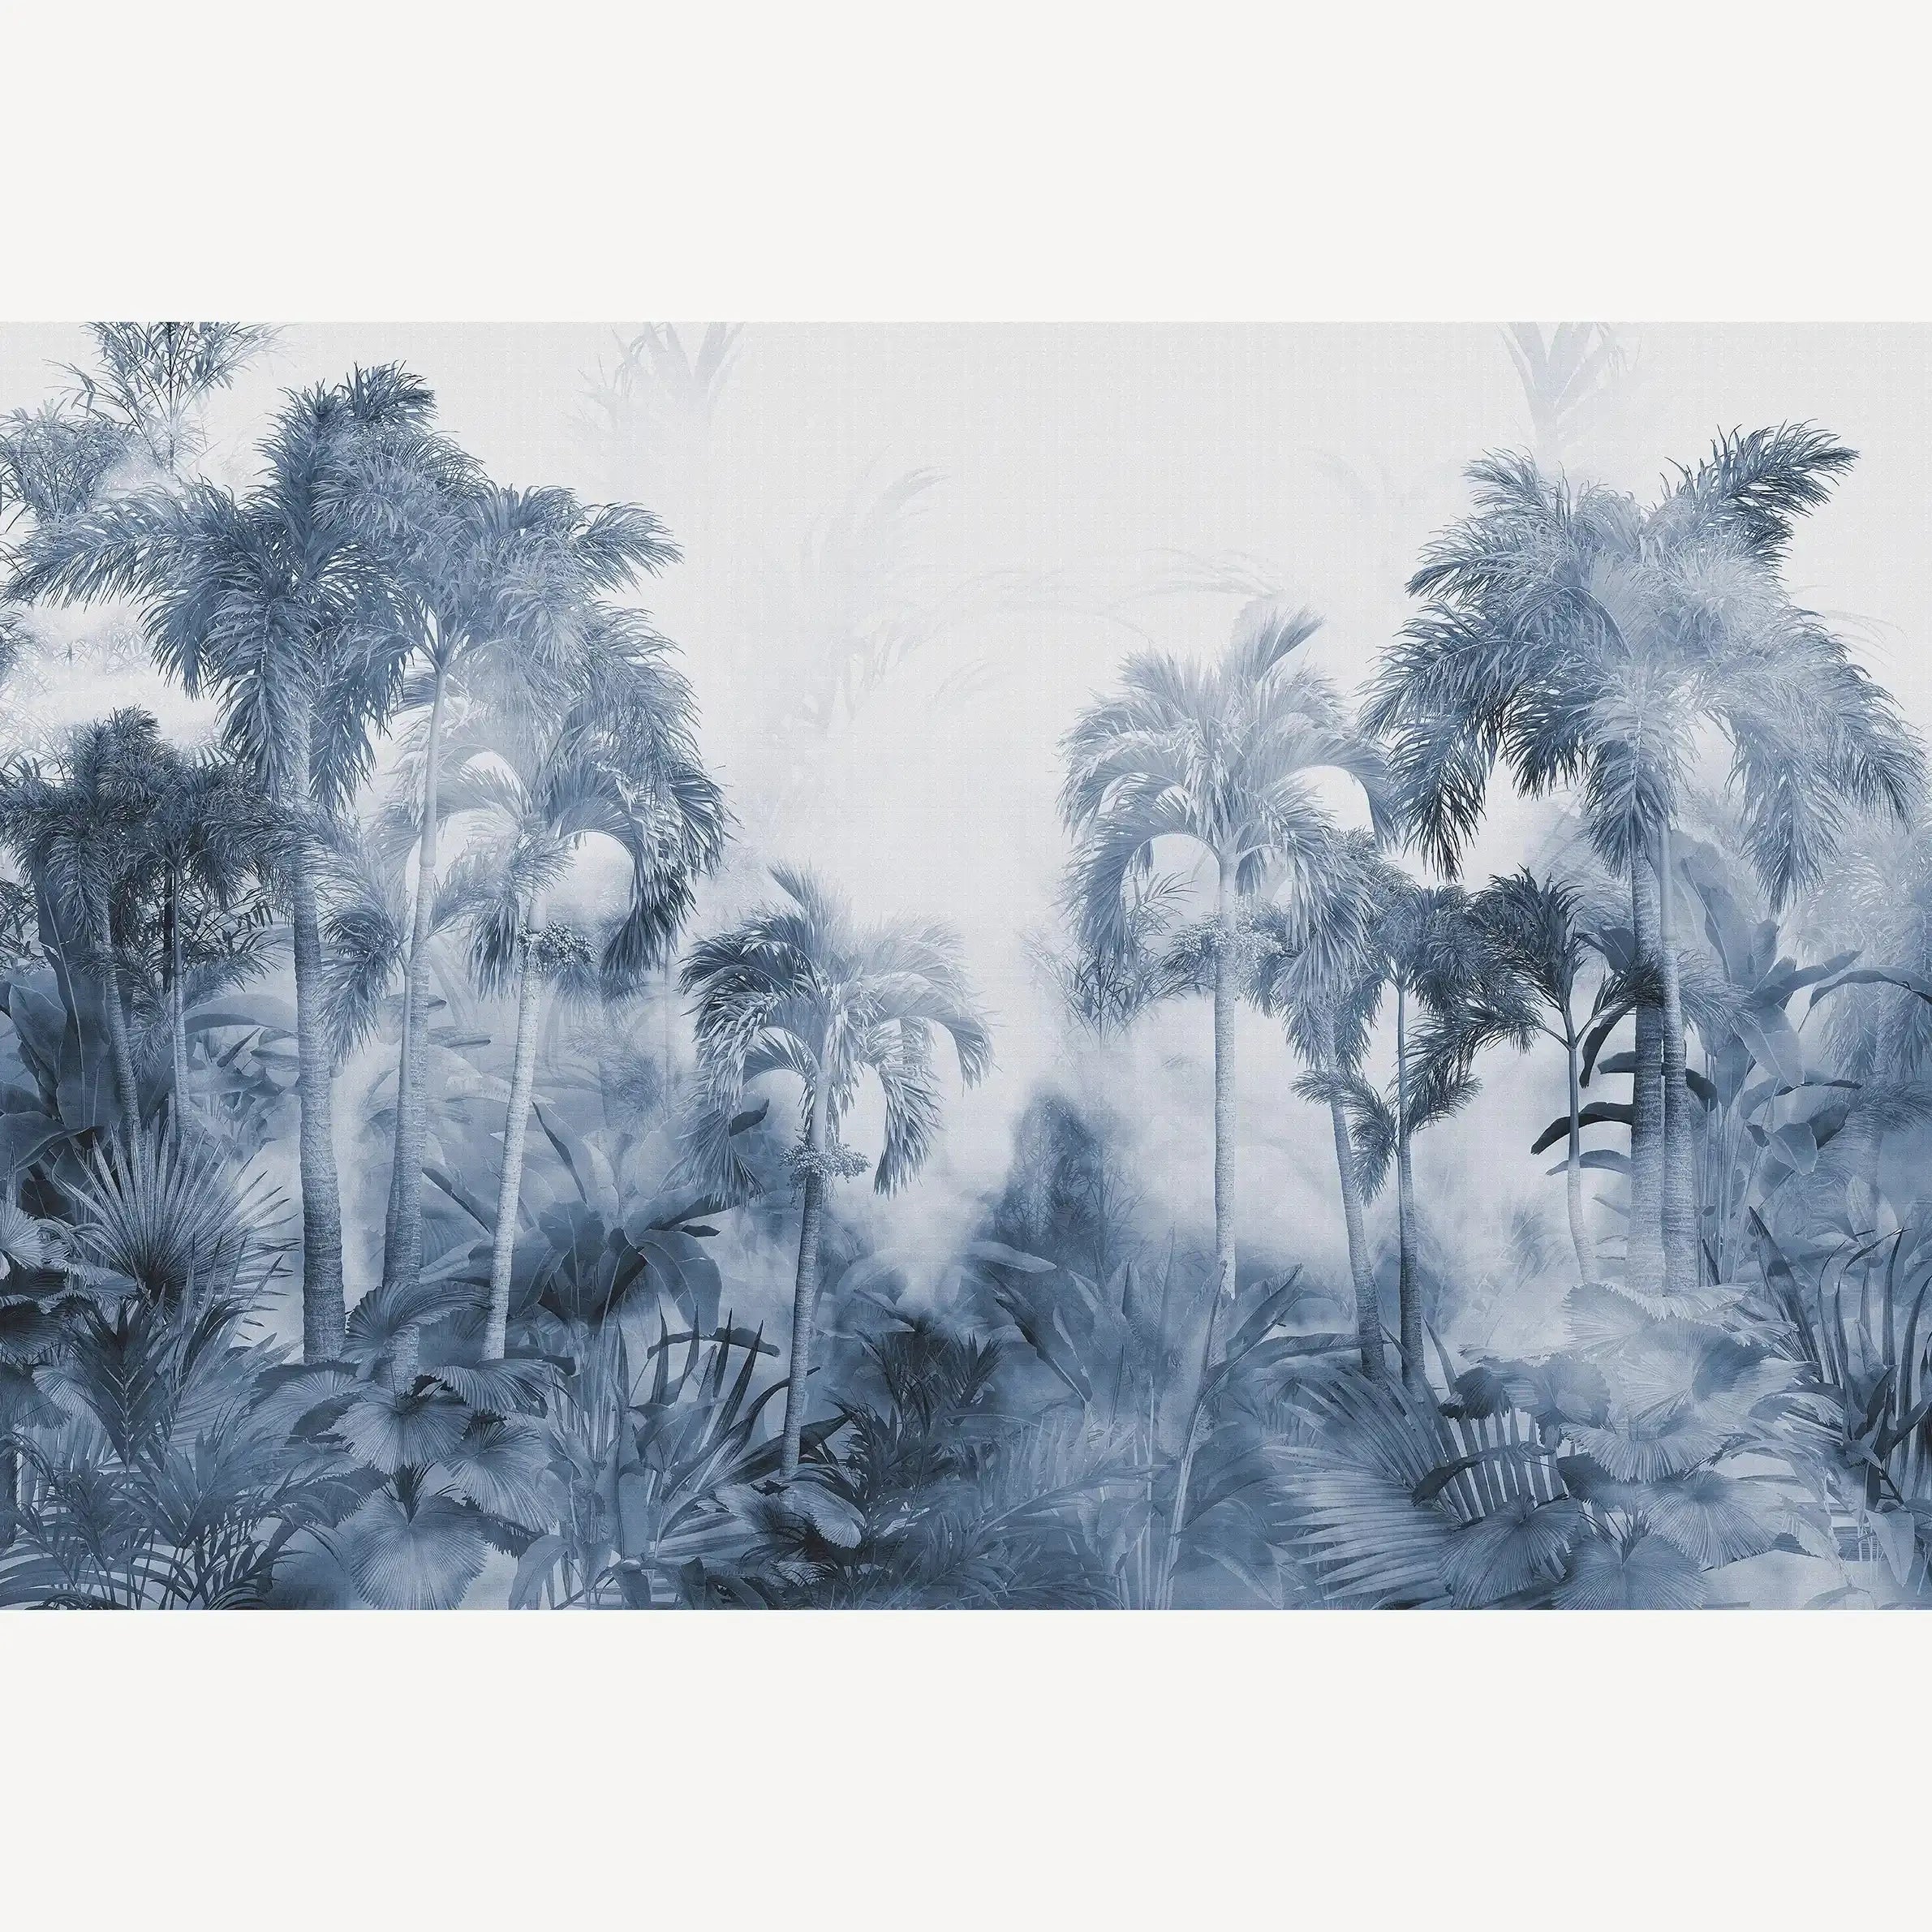 3029-D / Temporary Wallpaper: Tropical Jungle in Foggy Watercolor, Peel and Stick for Renters and DIY Deco - Artevella